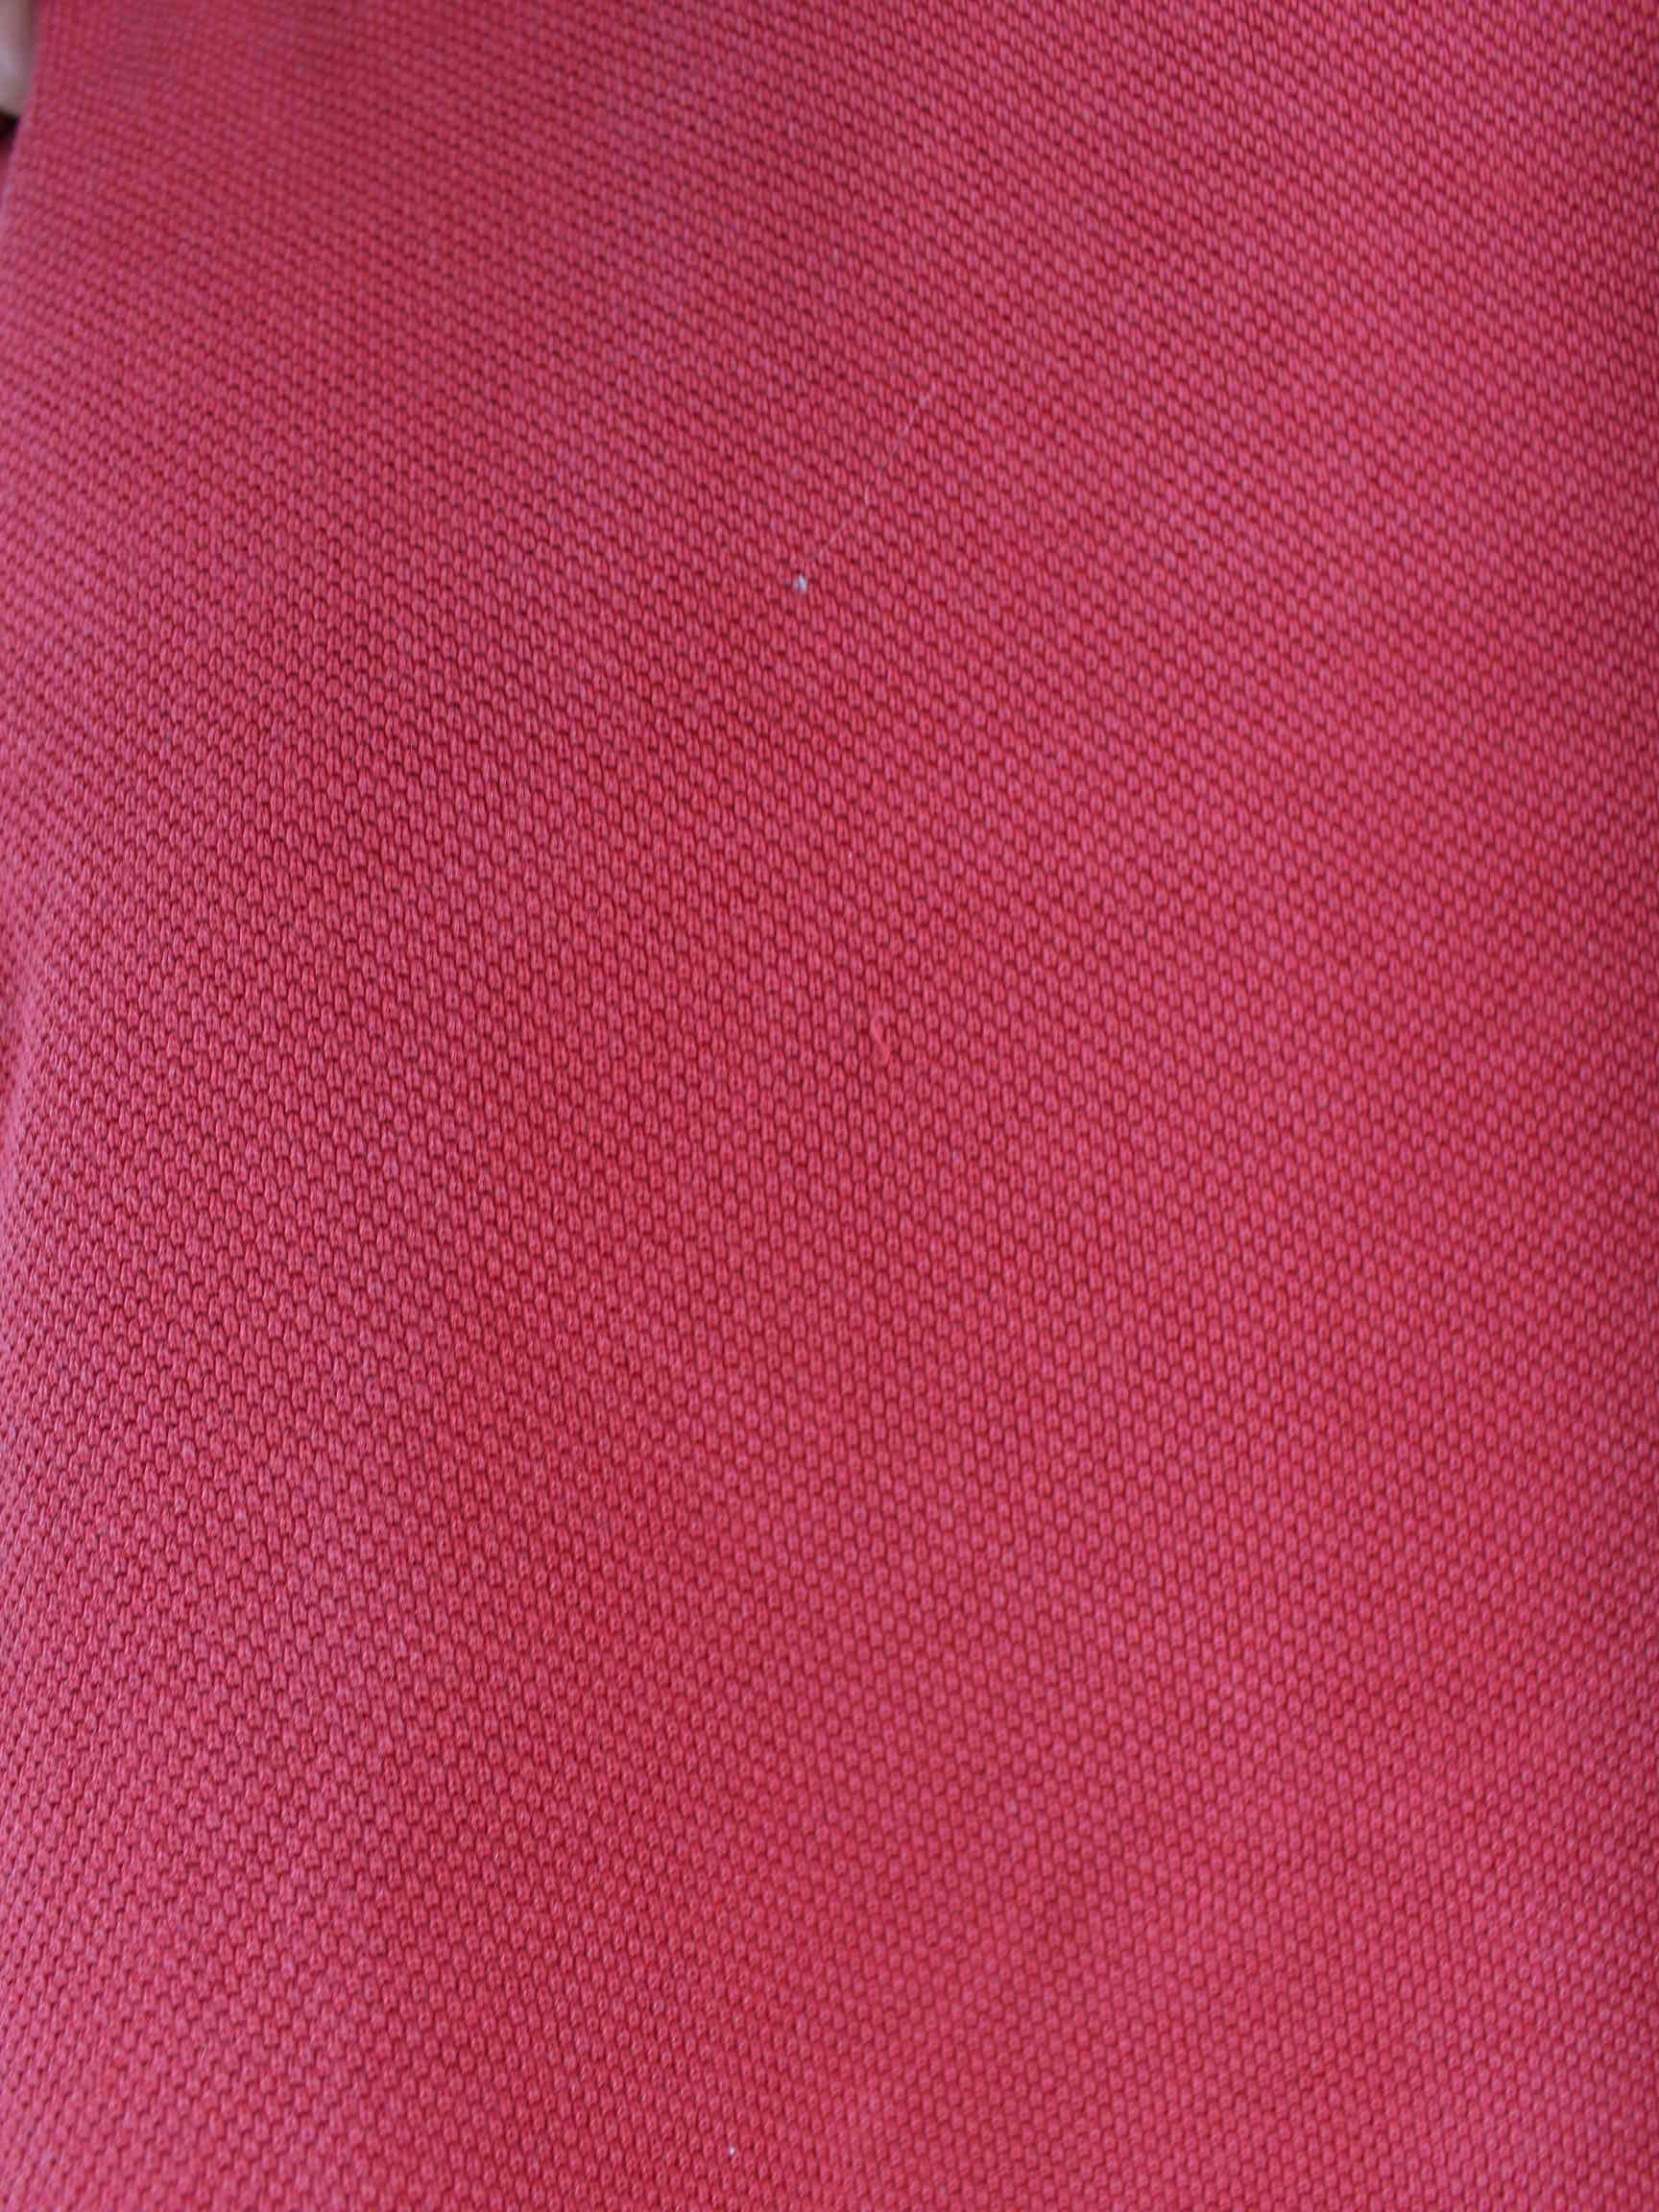 Lacoste 90s Vintage Sweater Rot L (detail image 3)